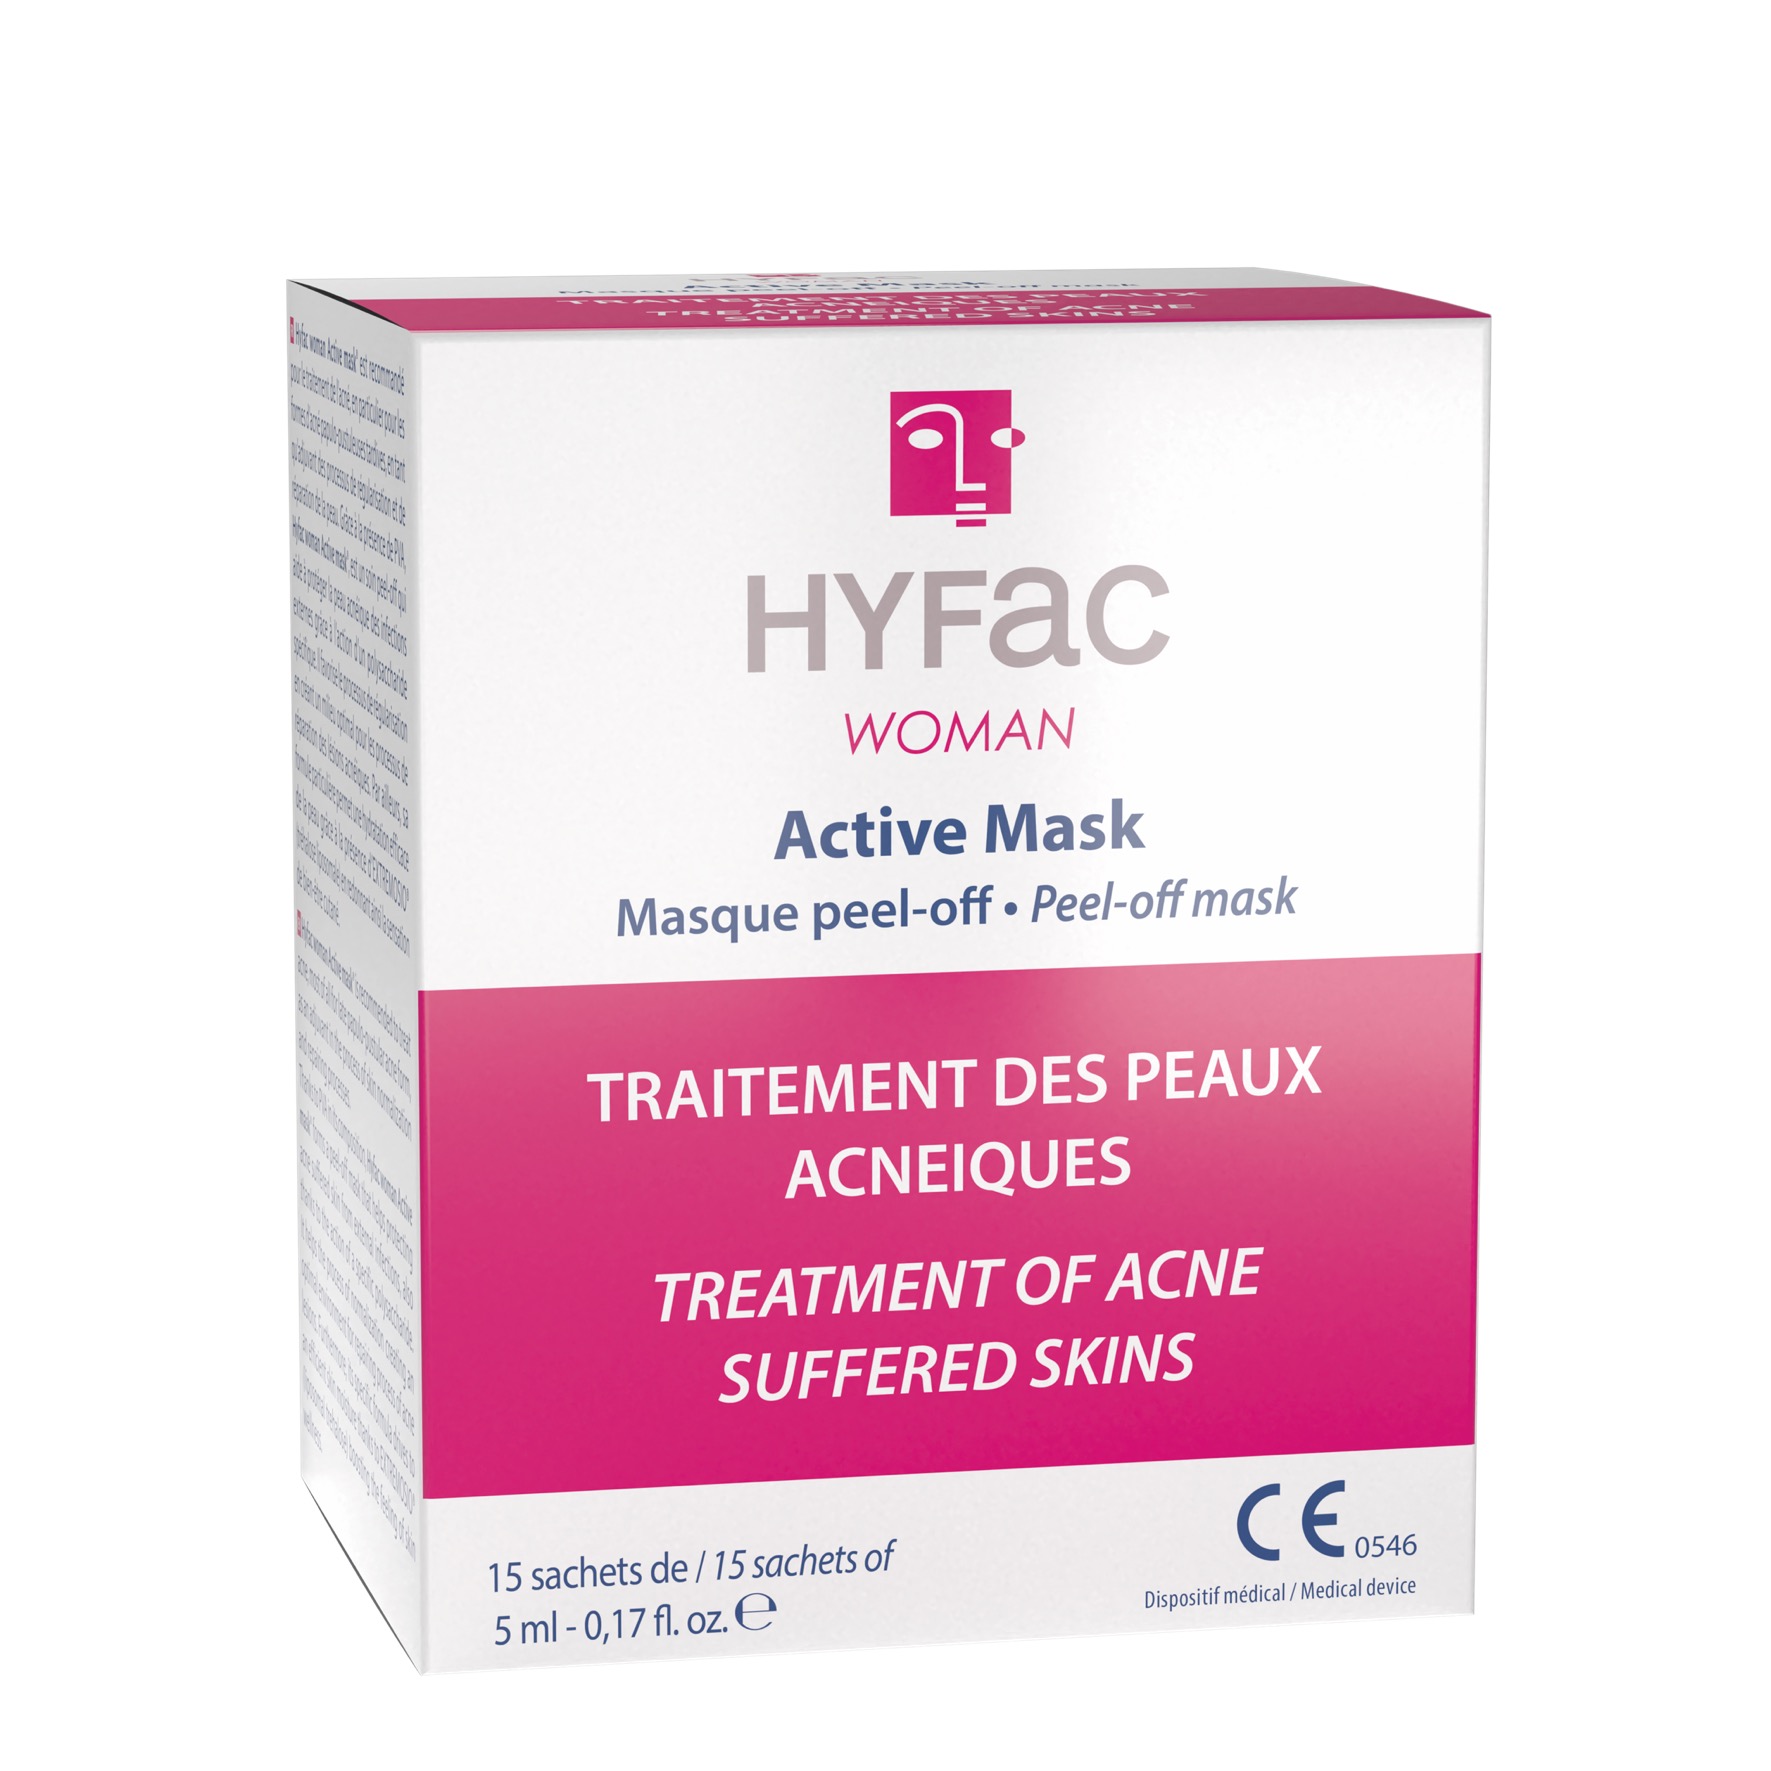 HYFAC WOMAN Active Mask acne treatment for adult women